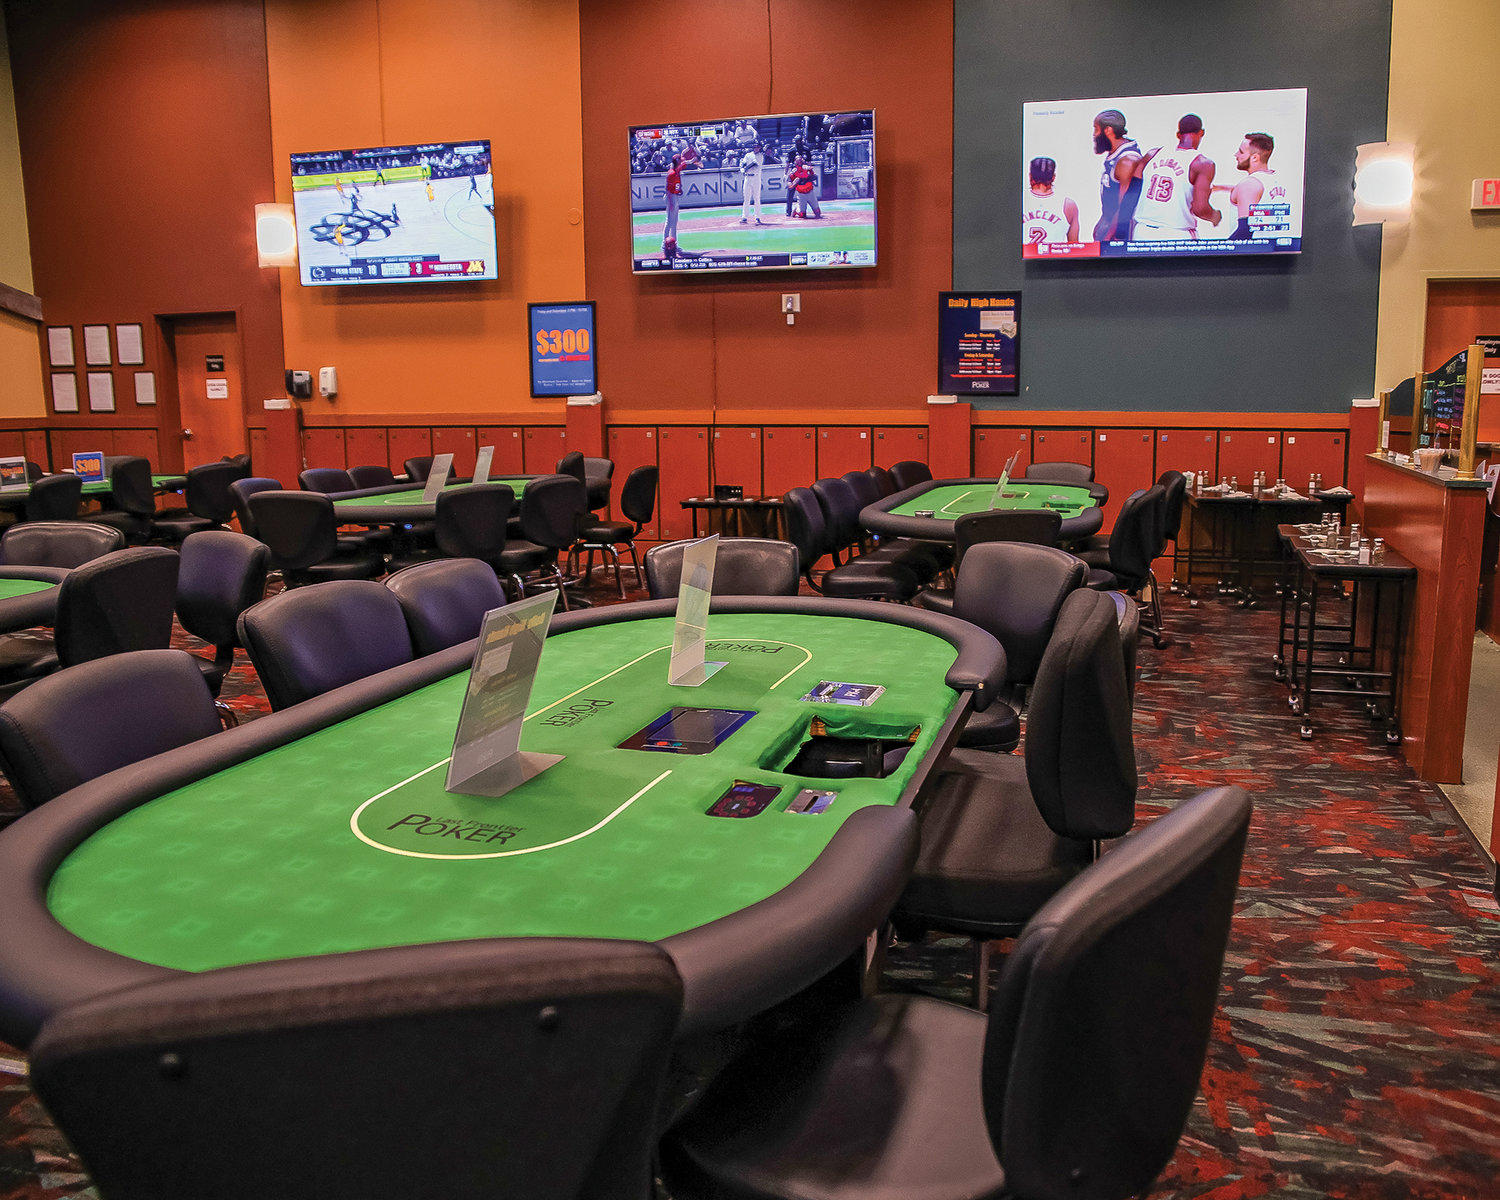 When New Phoenix reopened in October, The Last Frontier Casino became an all poker casino as shown on Wednesday, March 1.